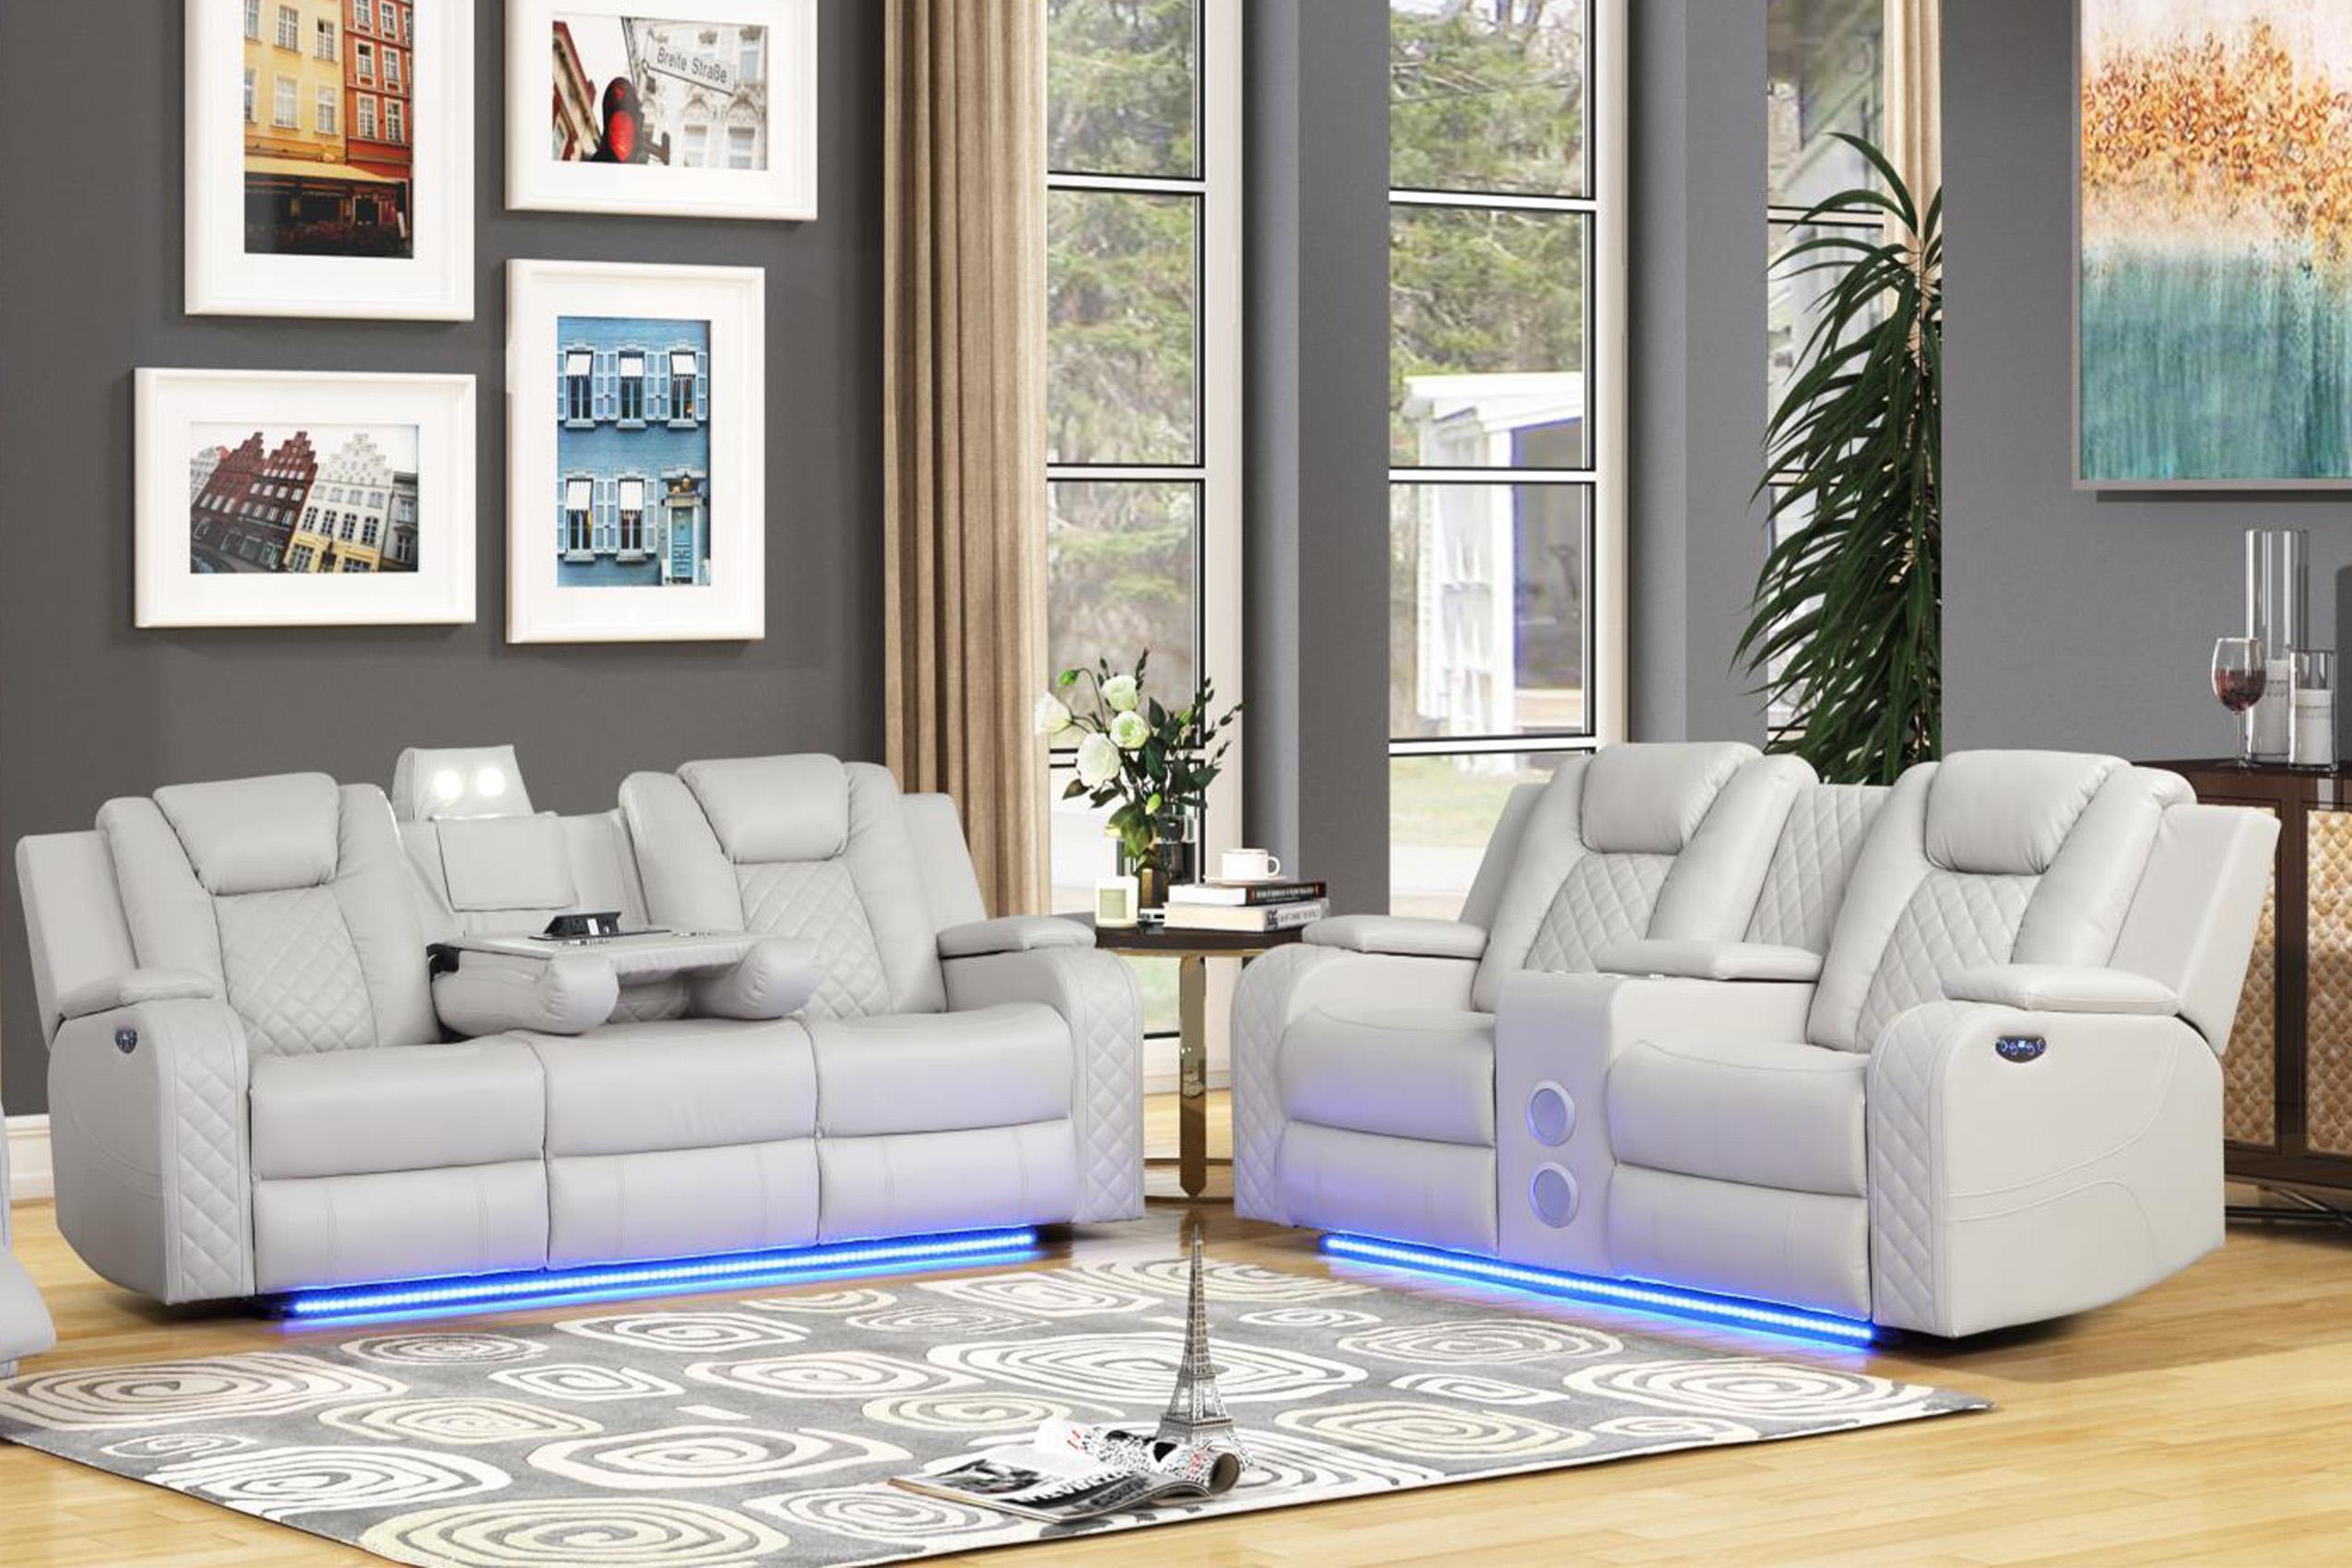 Contemporary, Modern Recliner Sofa Set BENZ ICE WHITE QB13425329-2PC in White Faux Leather